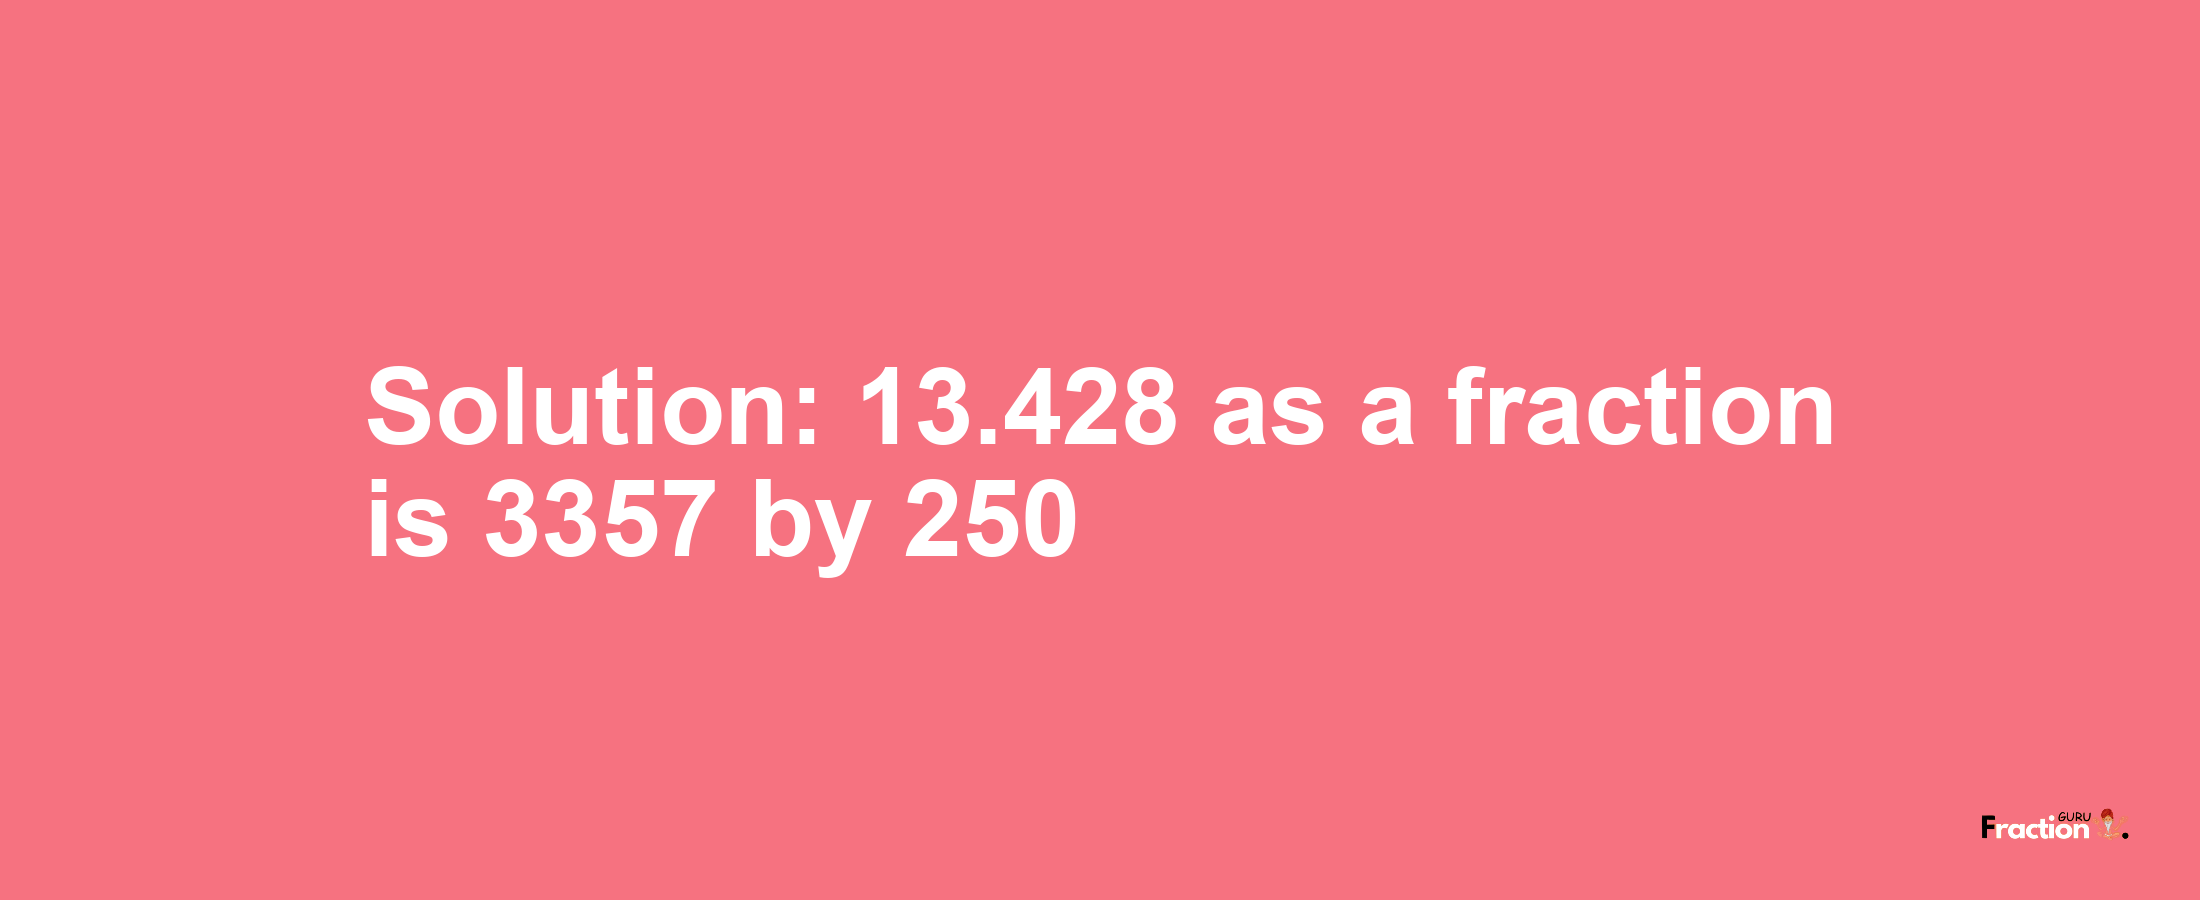 Solution:13.428 as a fraction is 3357/250